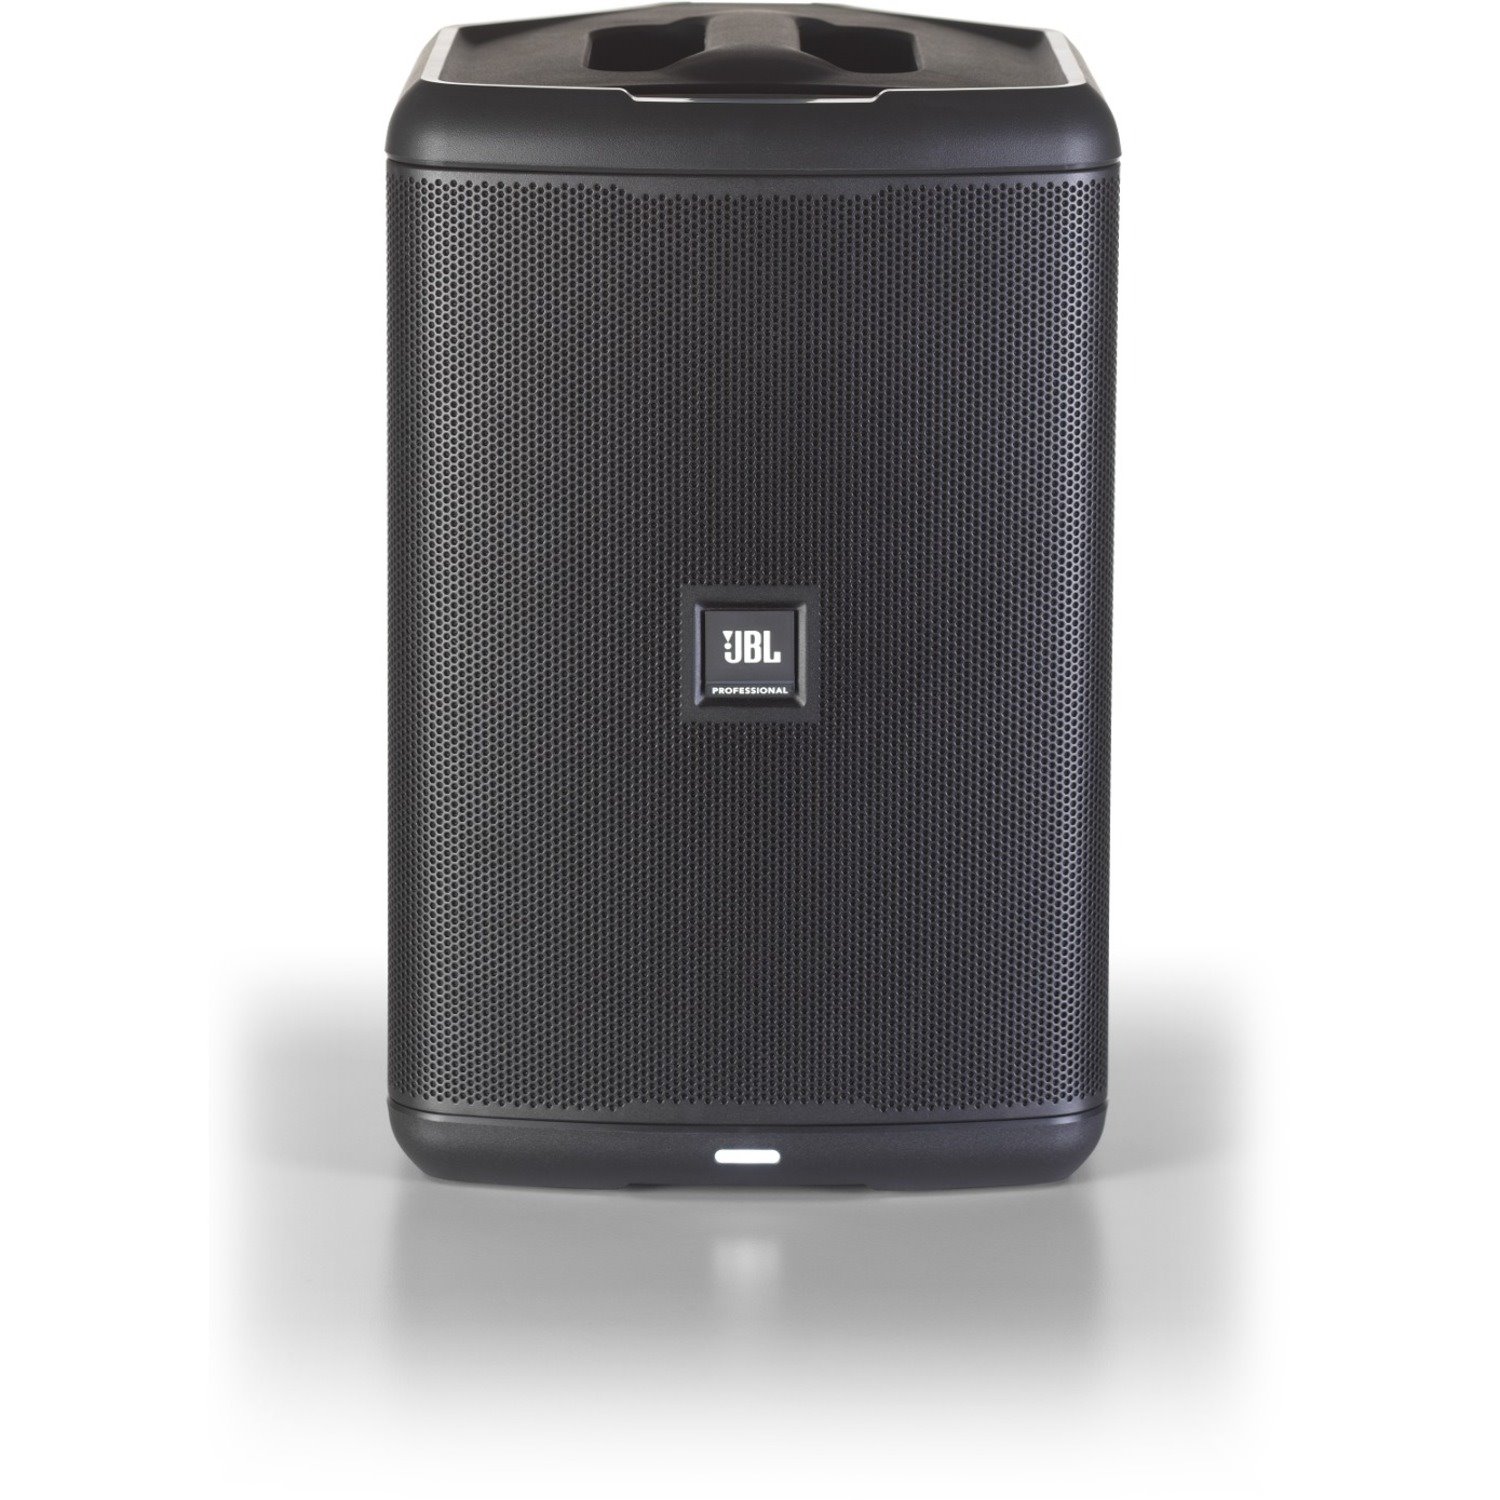 JBL Professional Compact Eon One Portable Bluetooth Speaker System